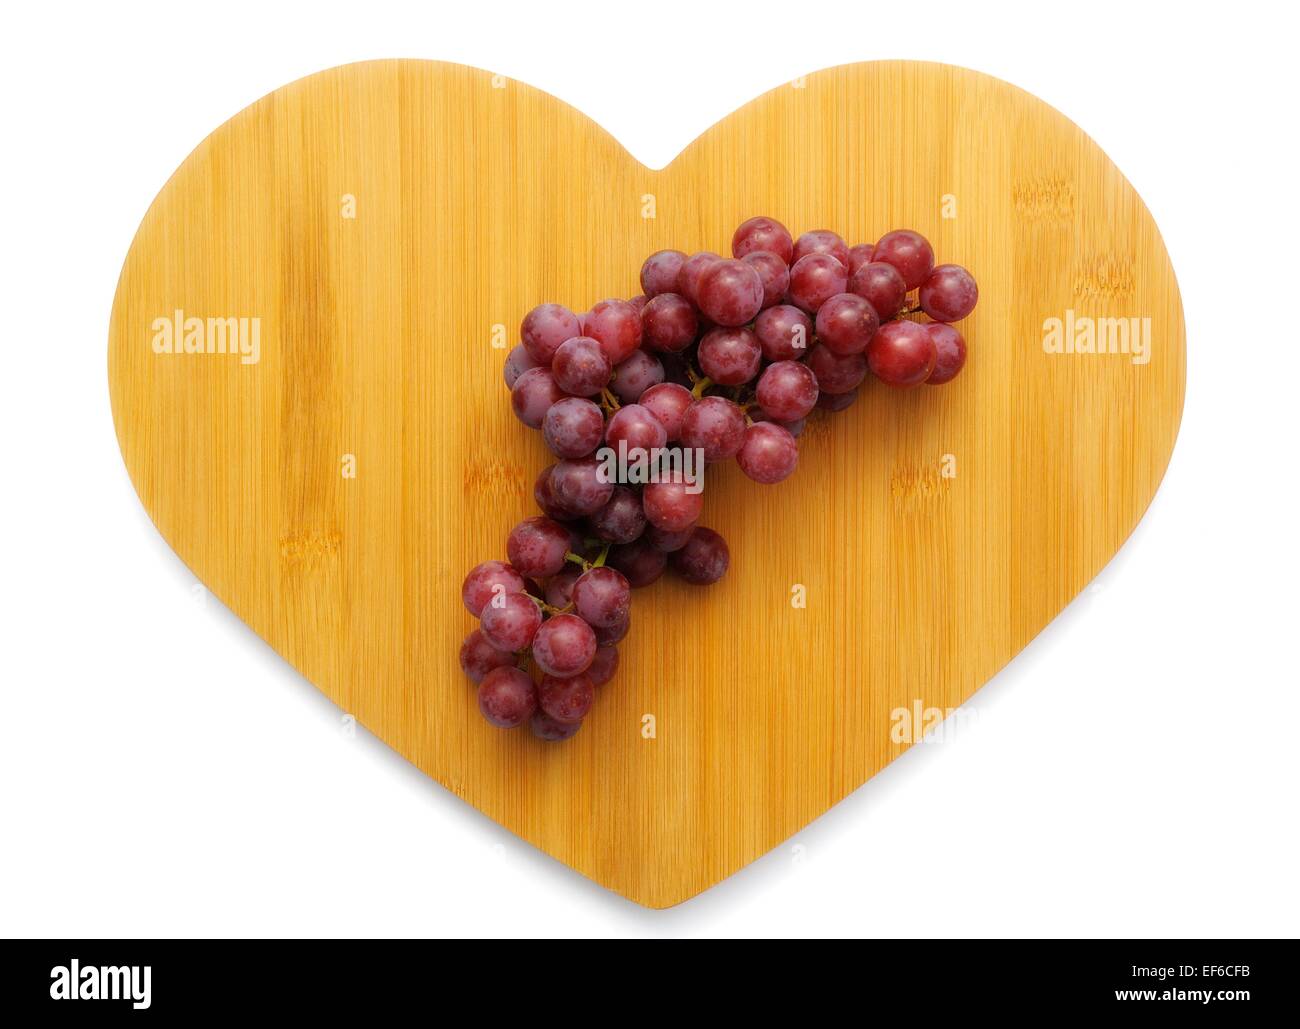 Red grapes on a wooden heart shaped background Stock Photo